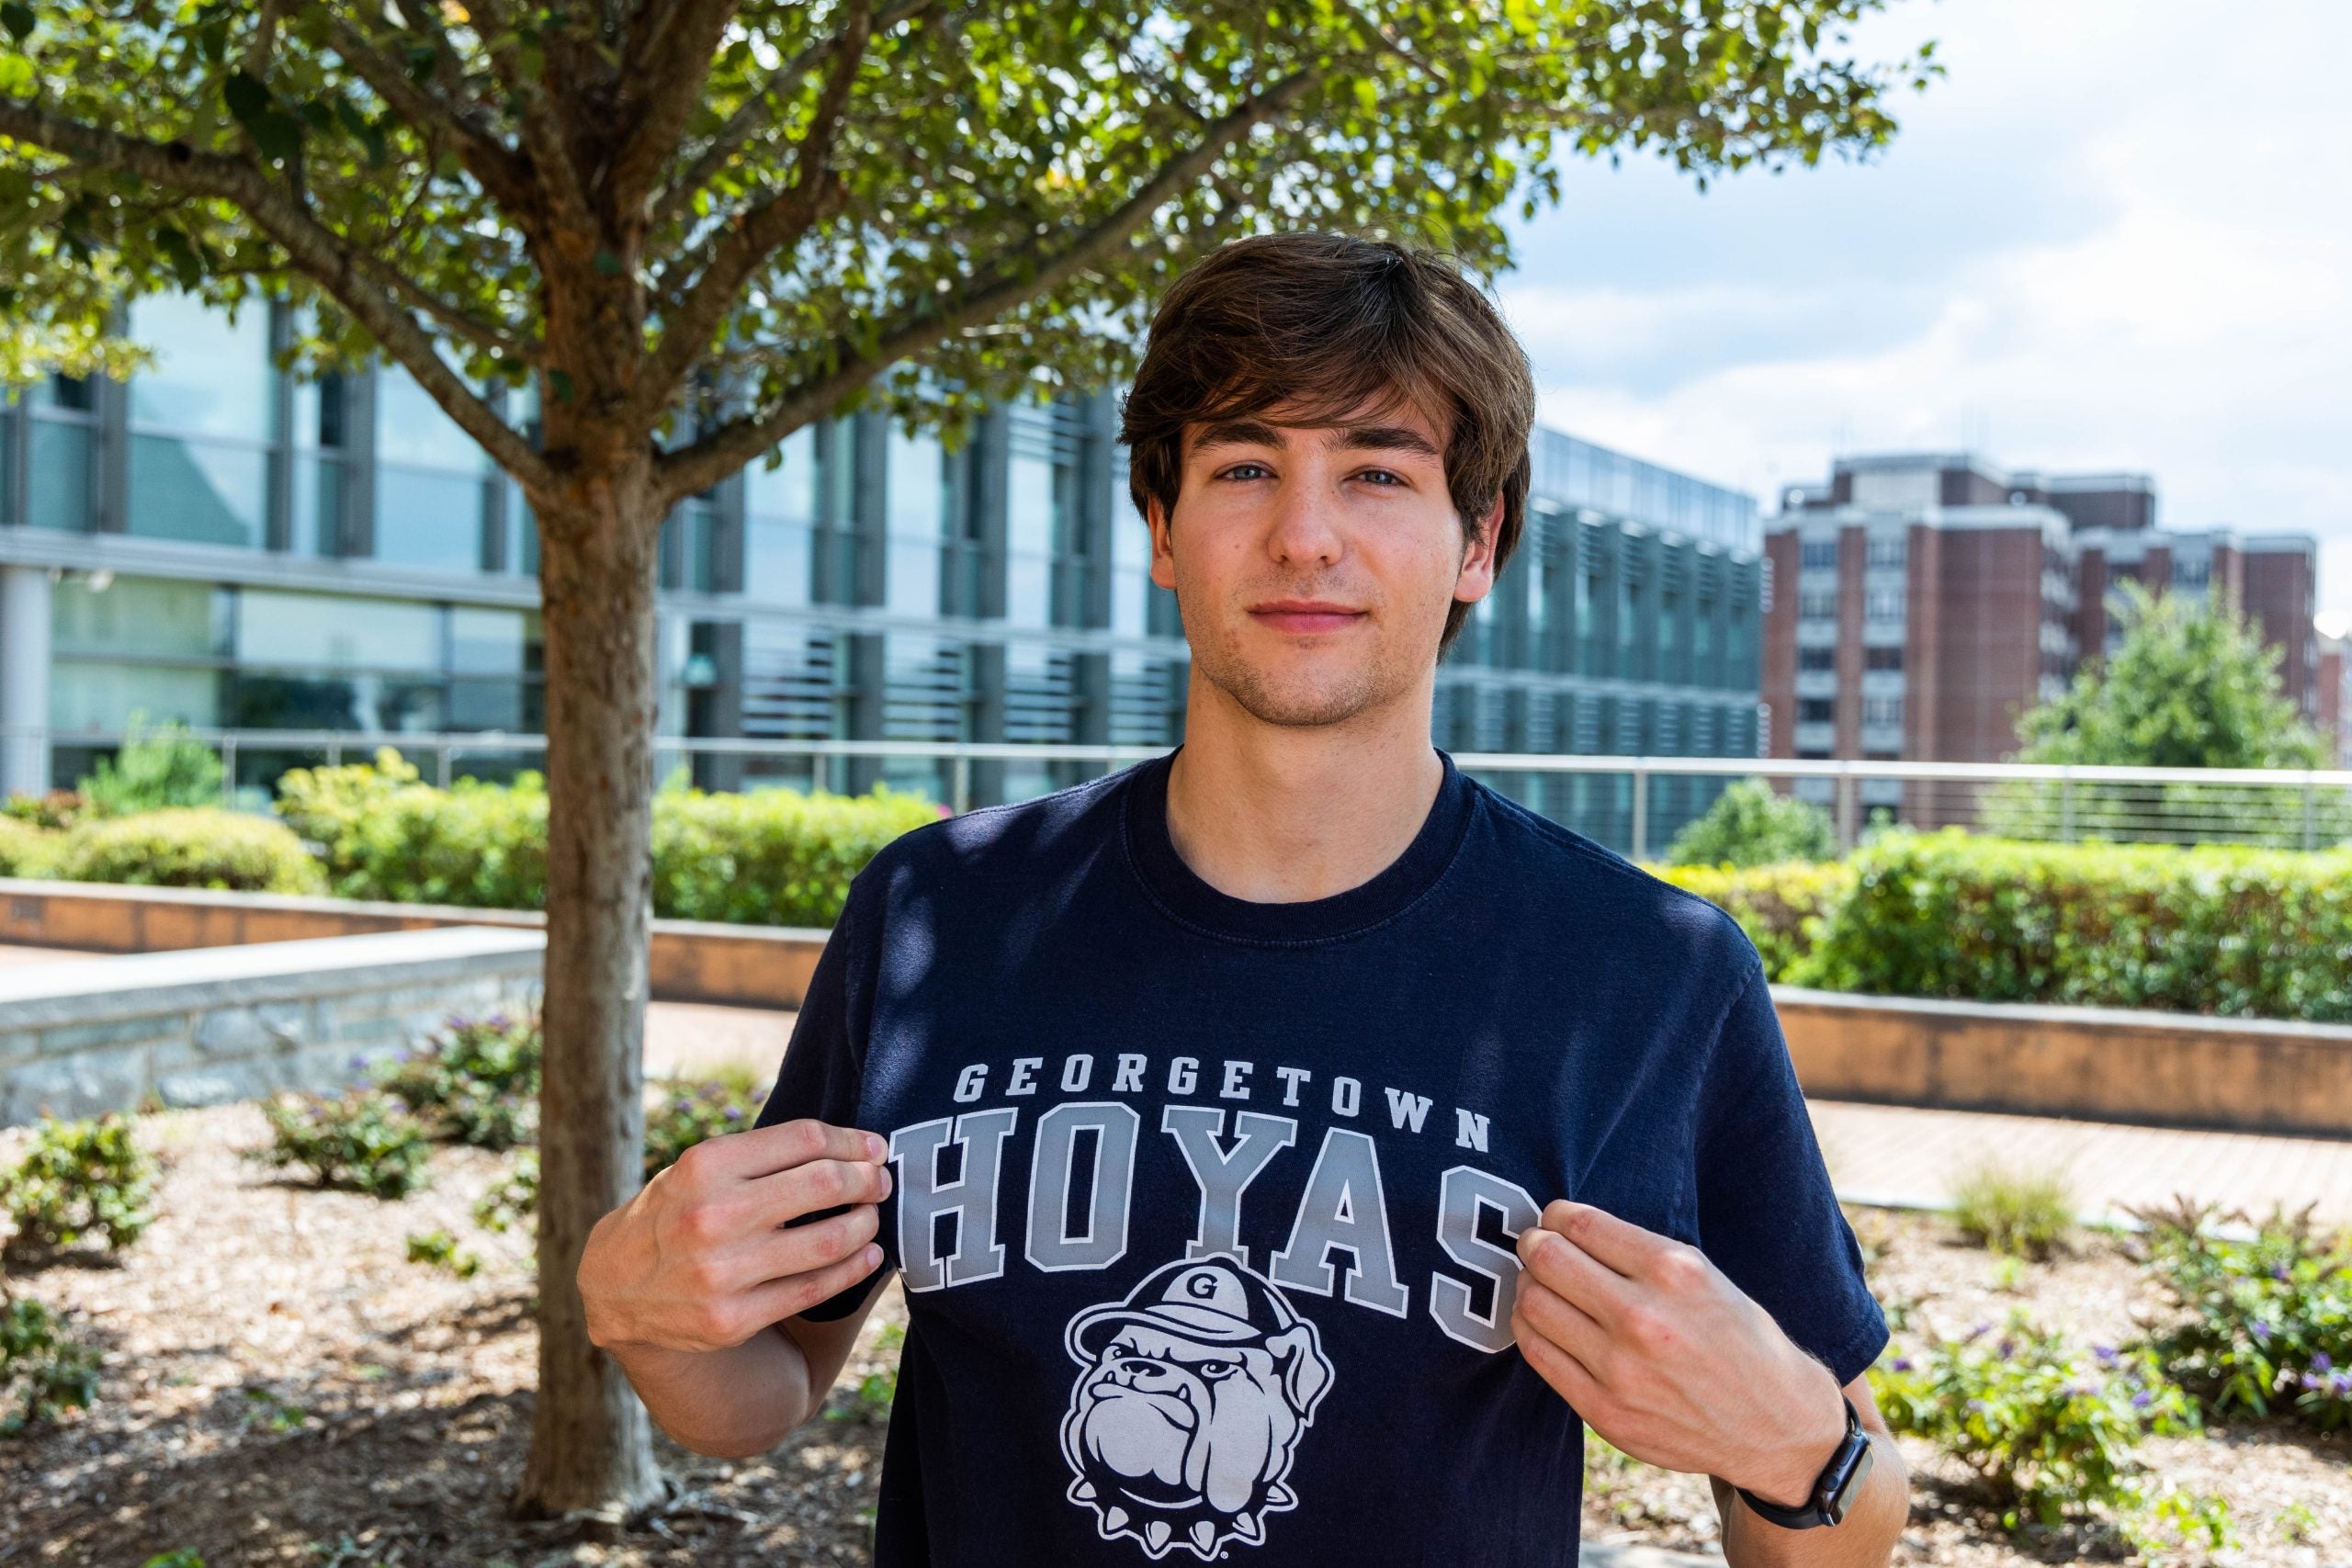 Young Man lifts up the Georgetown Hoyas part of his T-shirt